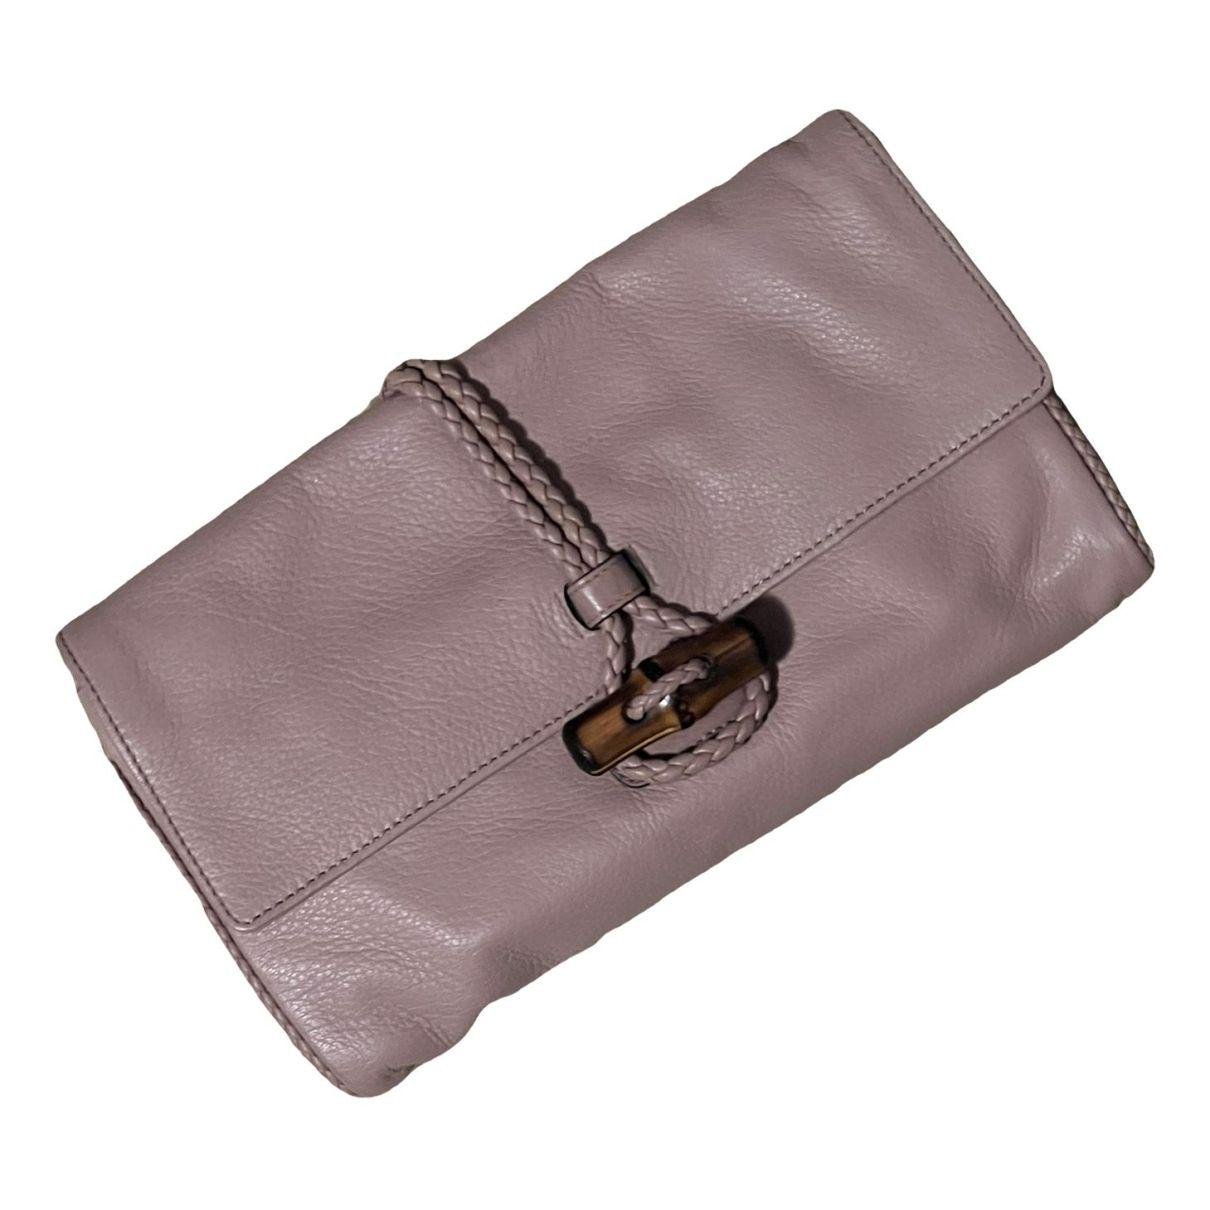 Bamboo leather clutch bag (Bamboo) by GUCCI